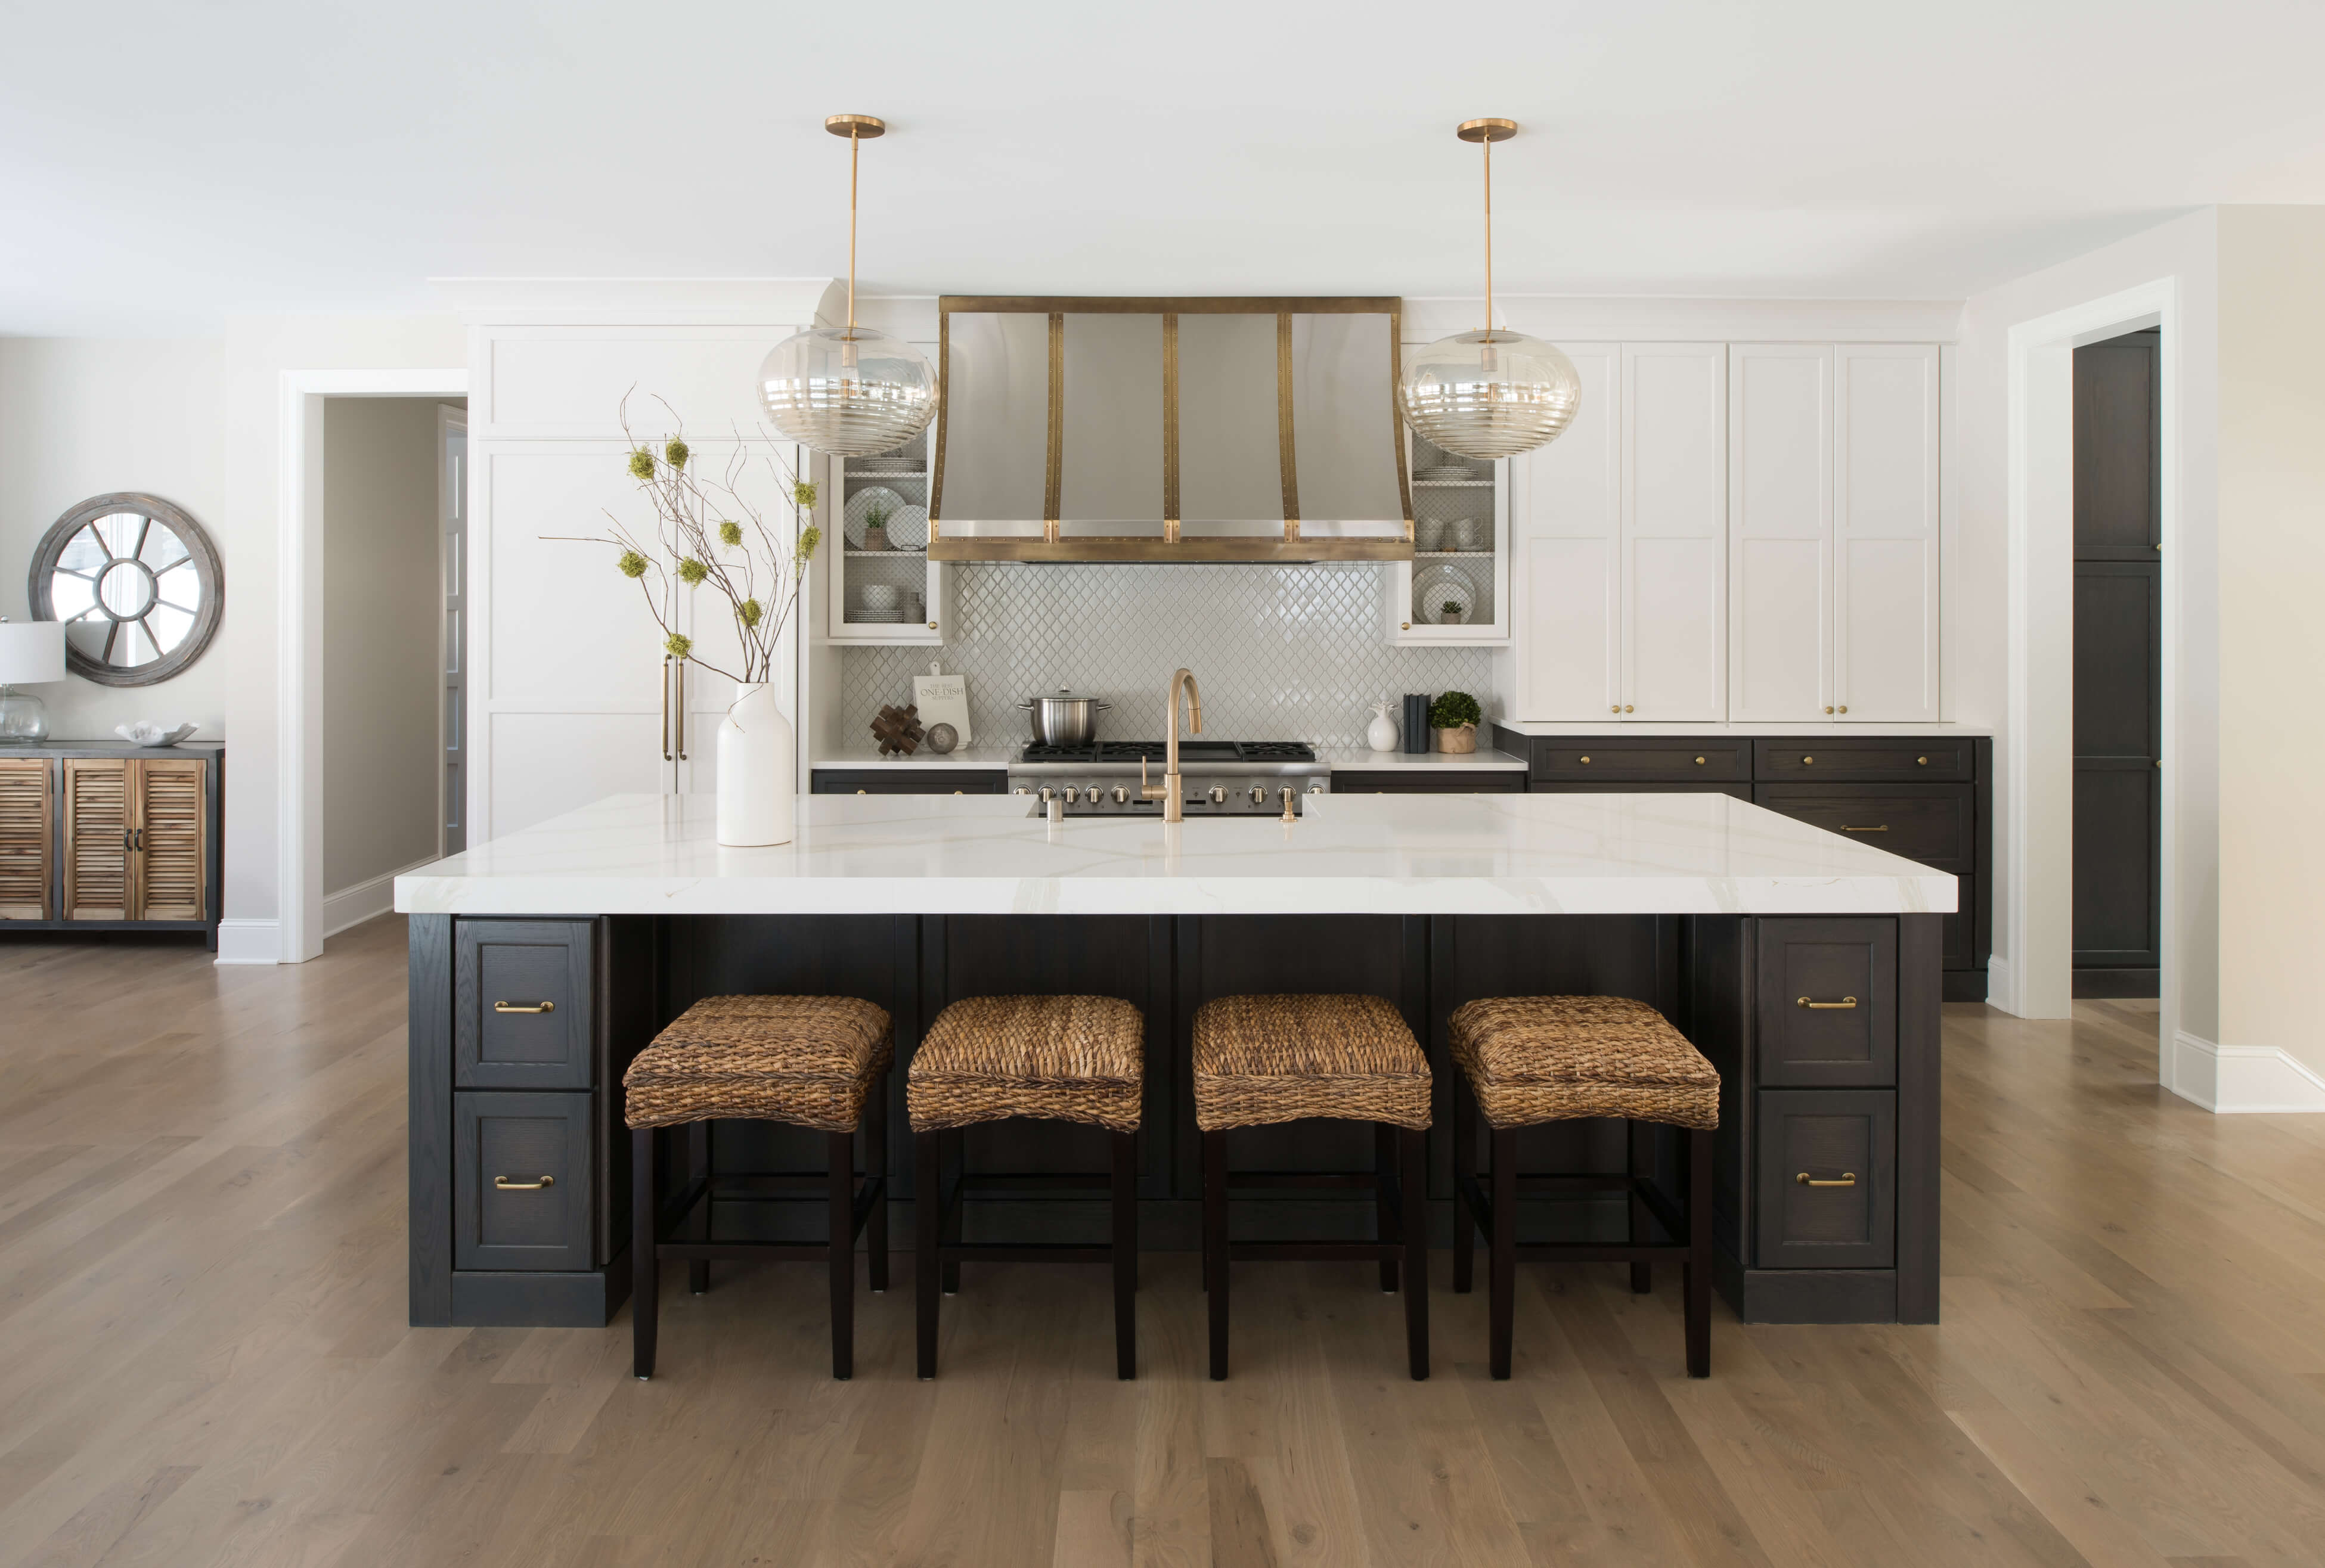 A modern farmhouse dream kitchen with dark gray stained oak for the base cabinets and white painted shaker wall cabinets.